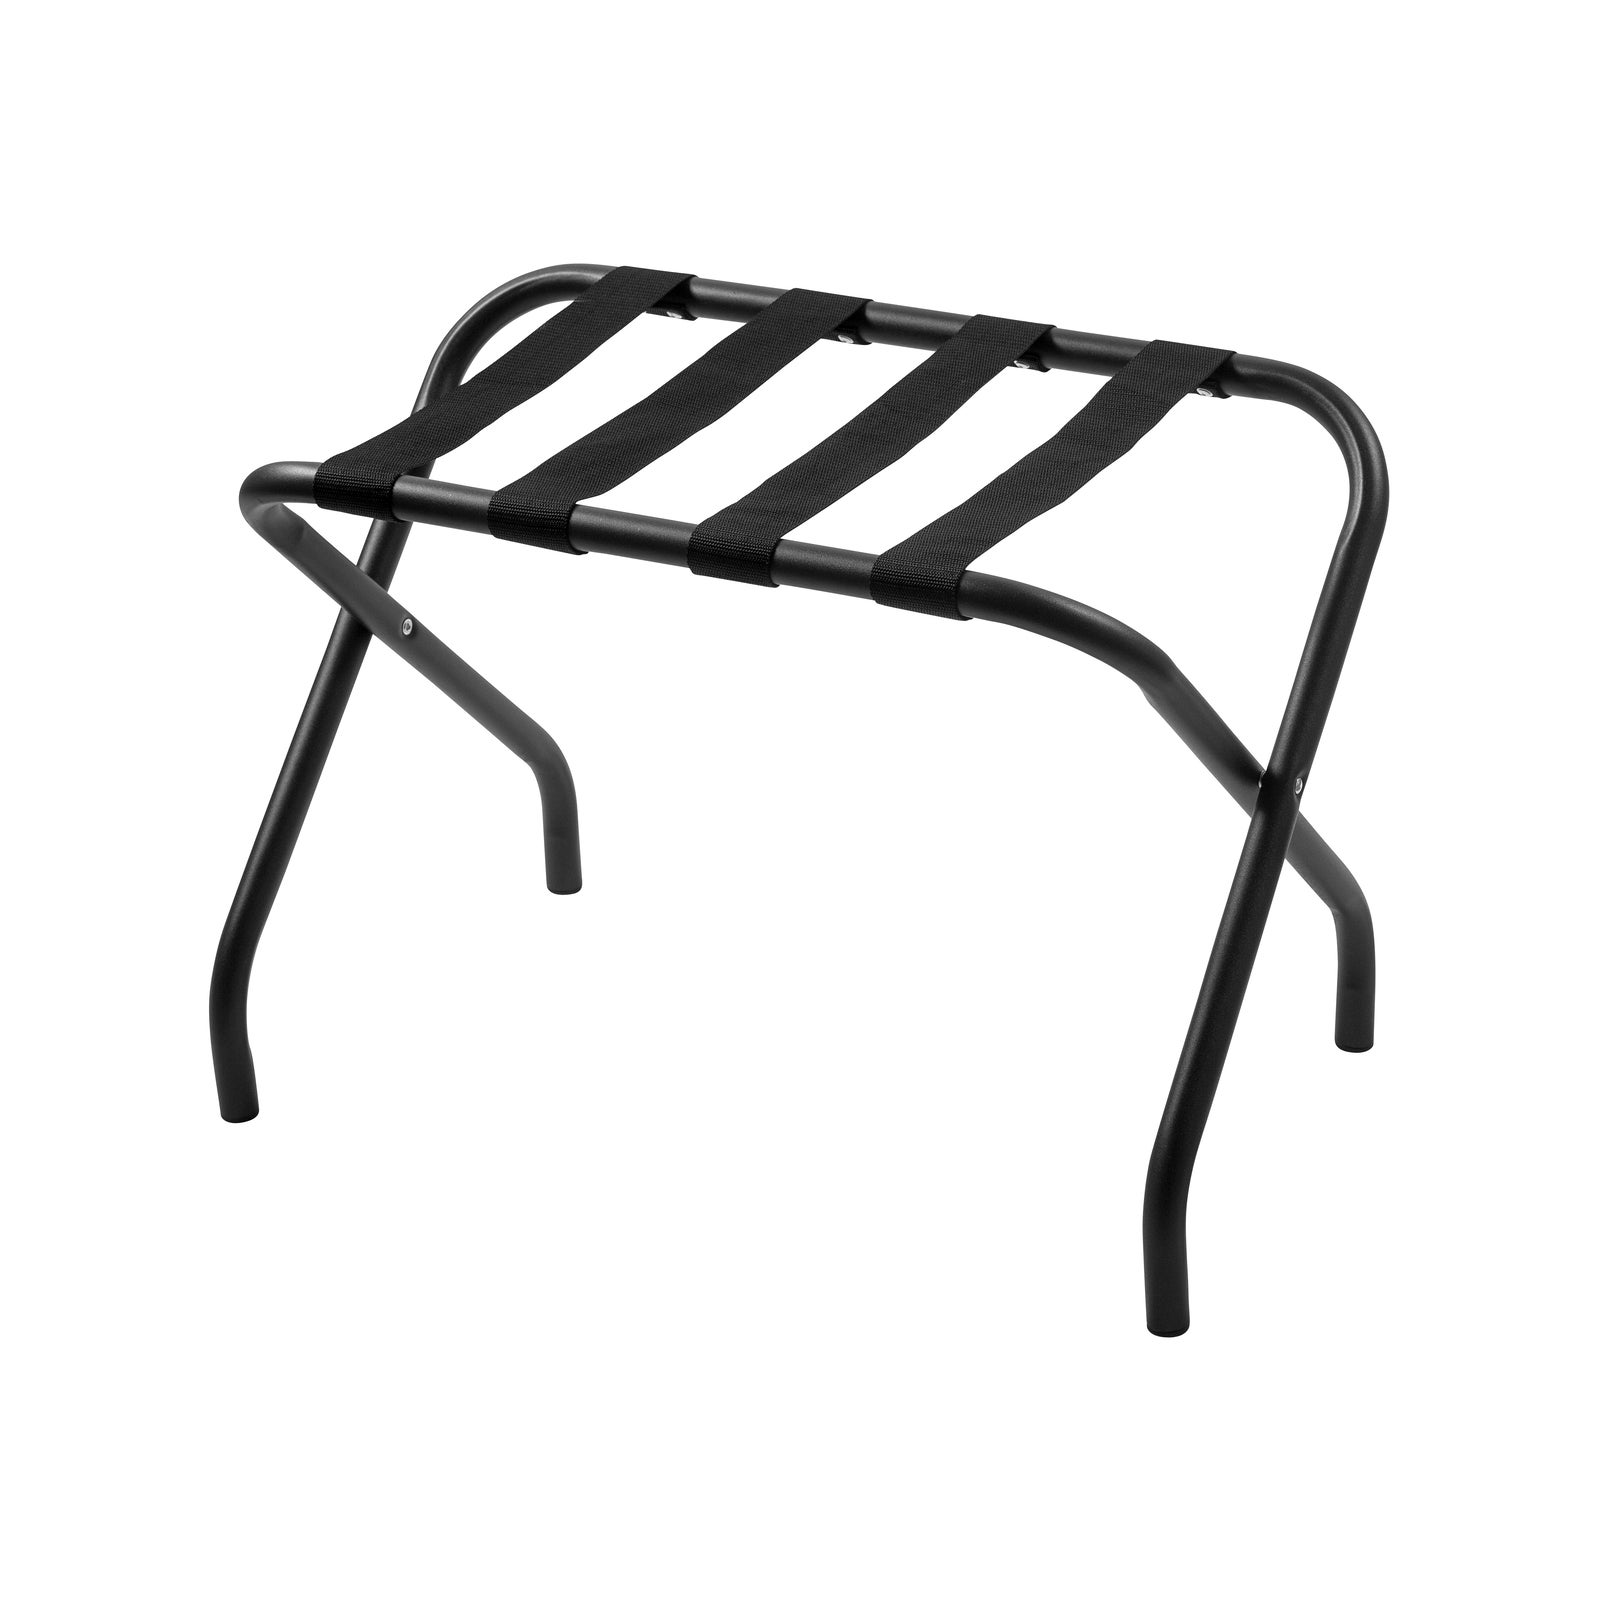 Black Strapped Luggage Rack without back